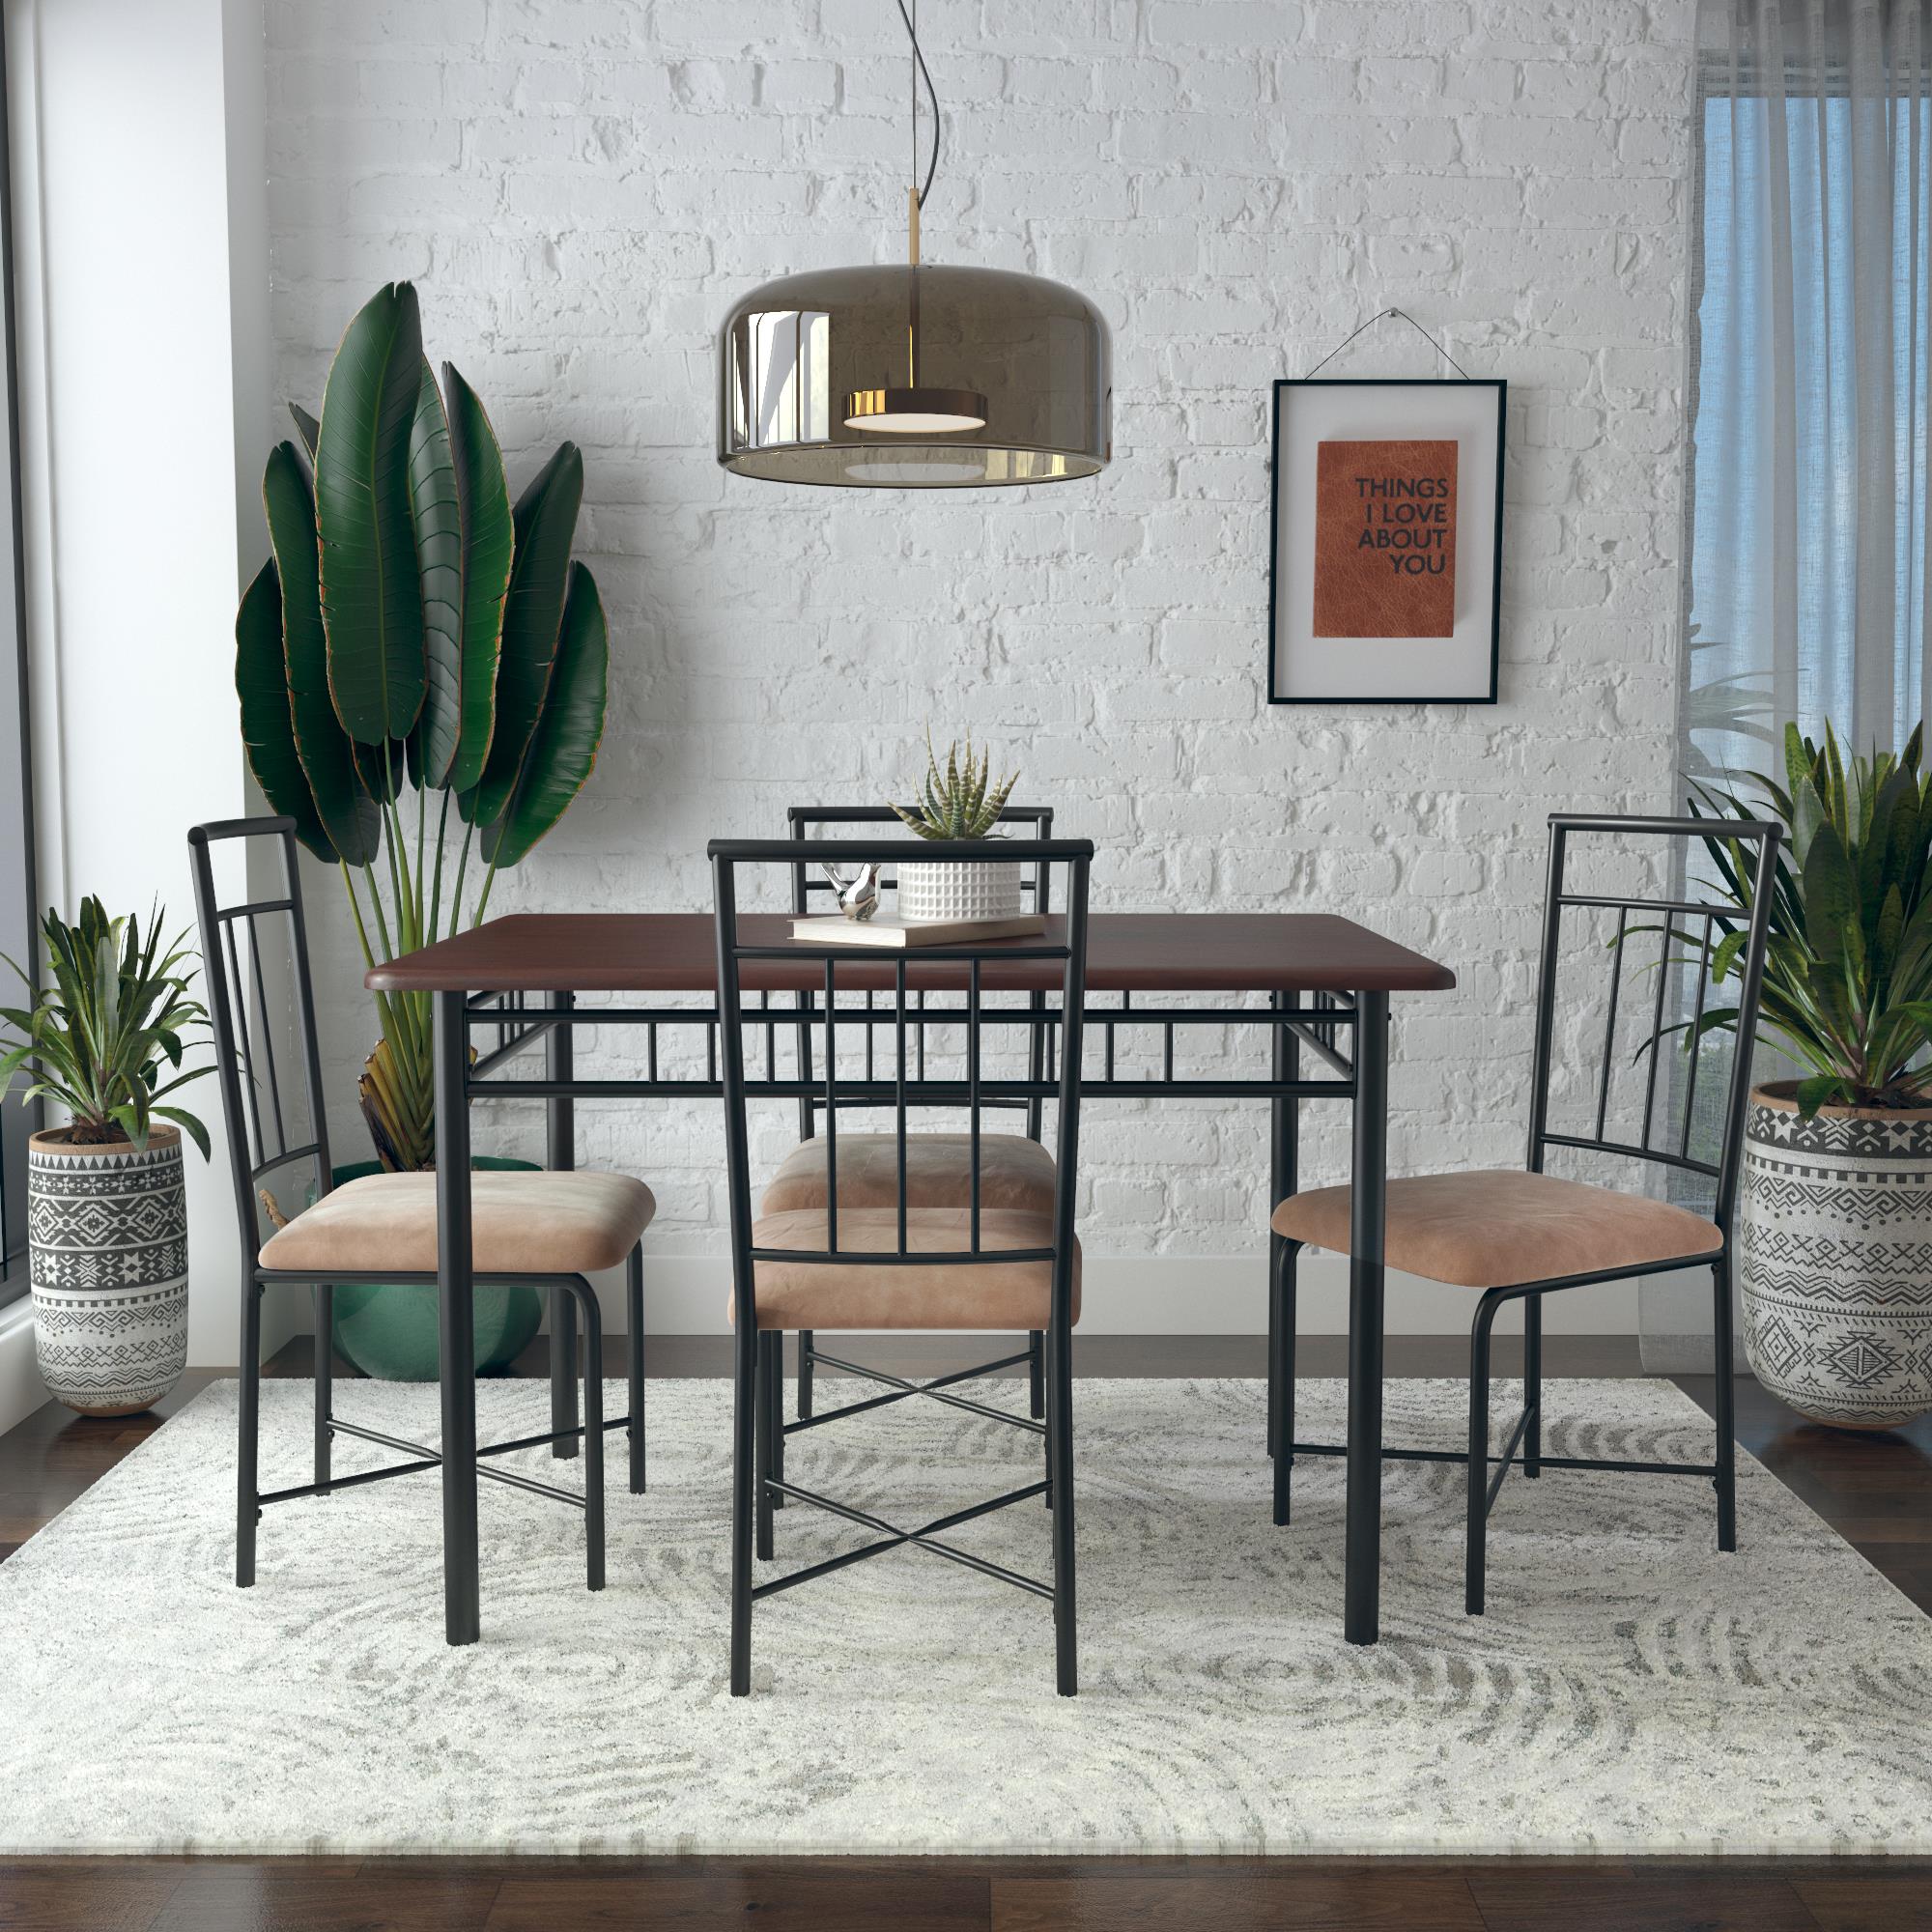 Mainstays Louise Traditional 5-Piece Wood & Metal Dining Set, Deep Walnut - image 1 of 22